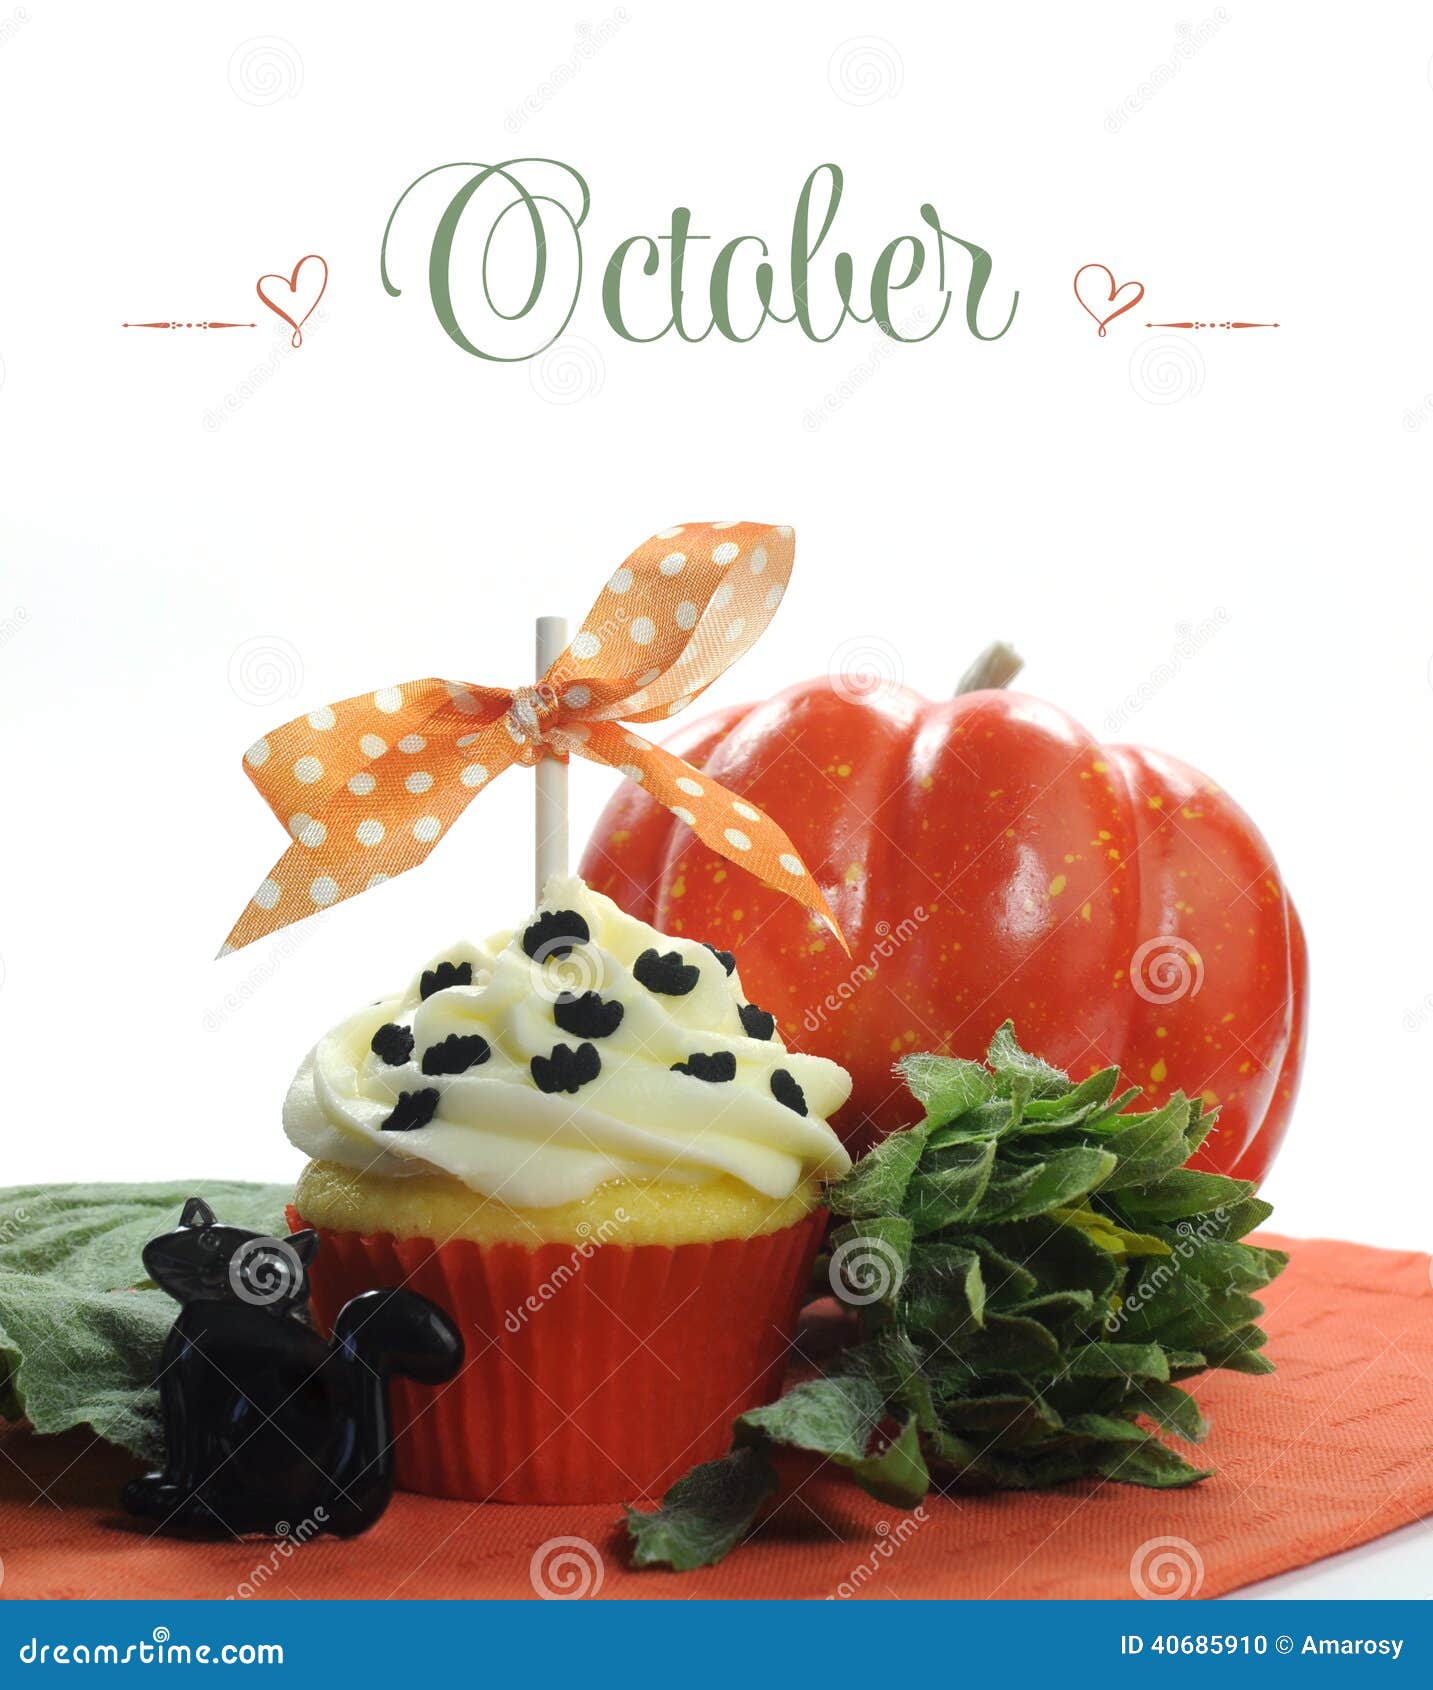 beautiful orange halloween theme cupcake with seasonal flowers and decorations for the month of october